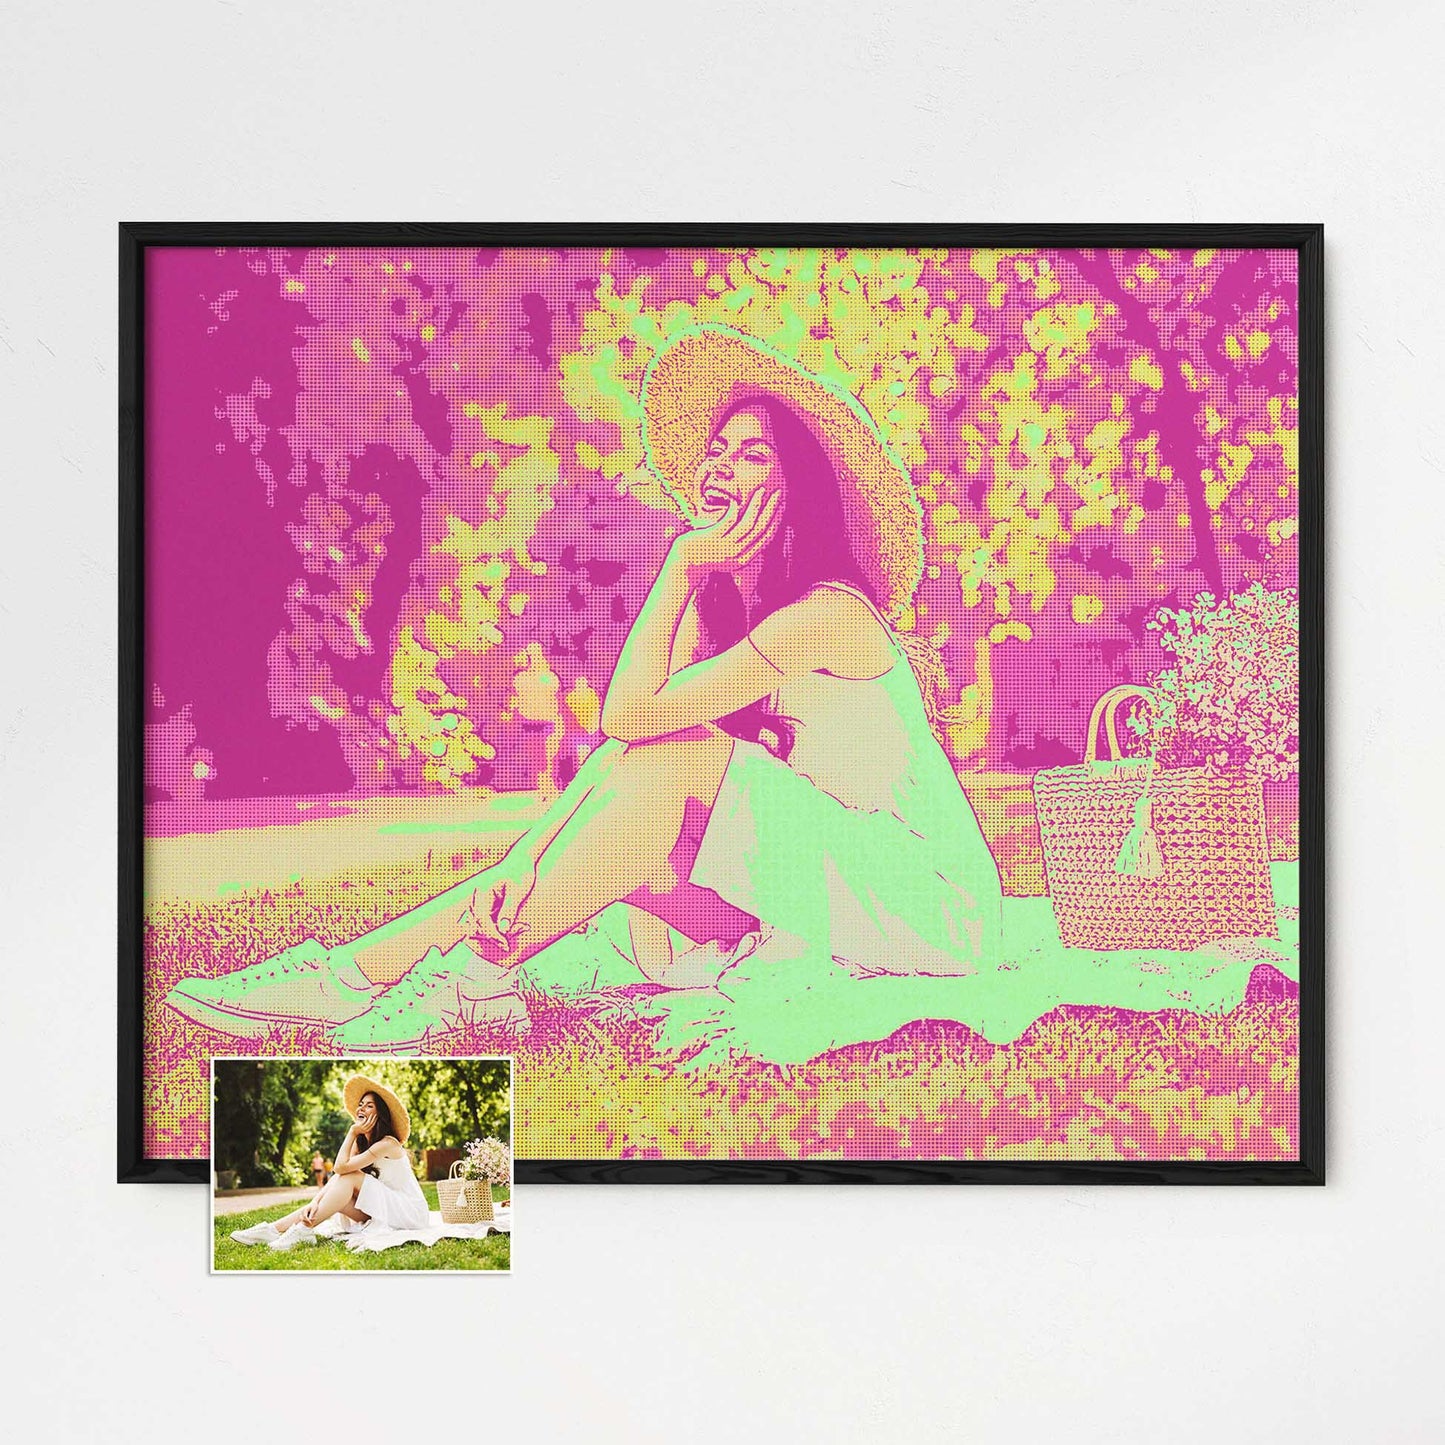 Discover the beauty of a Personalised Green & Pink Pop Art Framed Print from your photo. This captivating artwork combines vibrant colors, unique design, and a touch of coolness to create a one-of-a-kind piece. Printed on thick paper